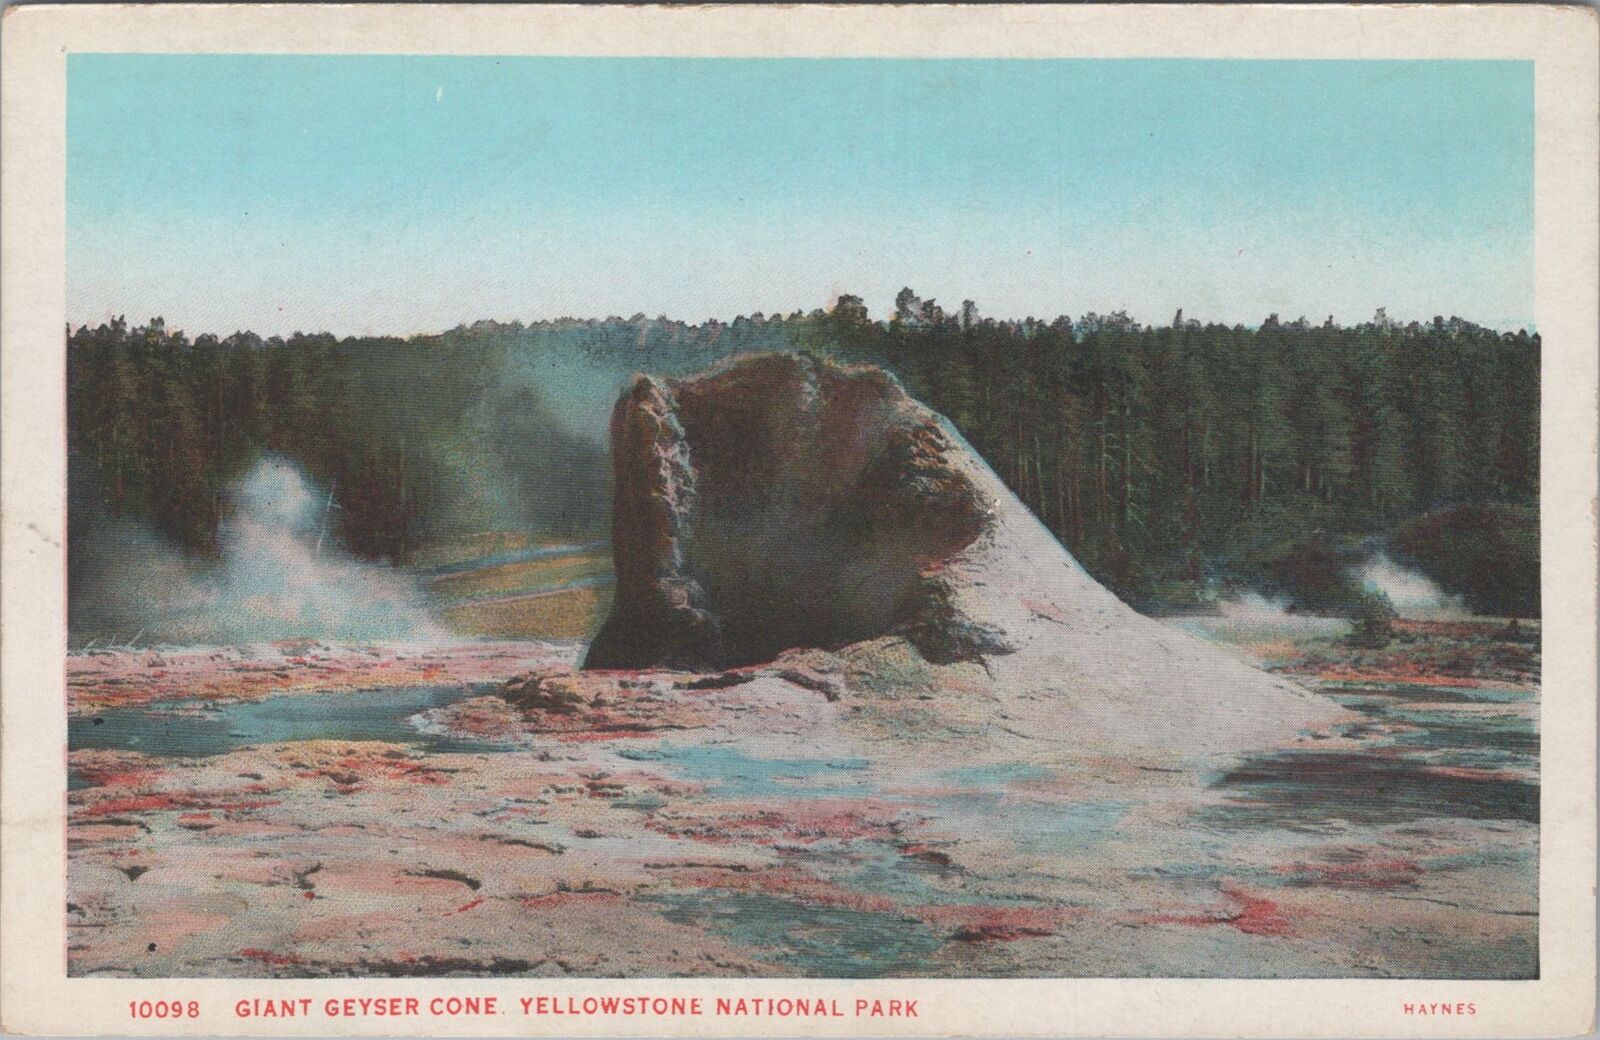 Giant Geyser Cone Yellowstone National Park Haynes 10098 Unposted Postcard